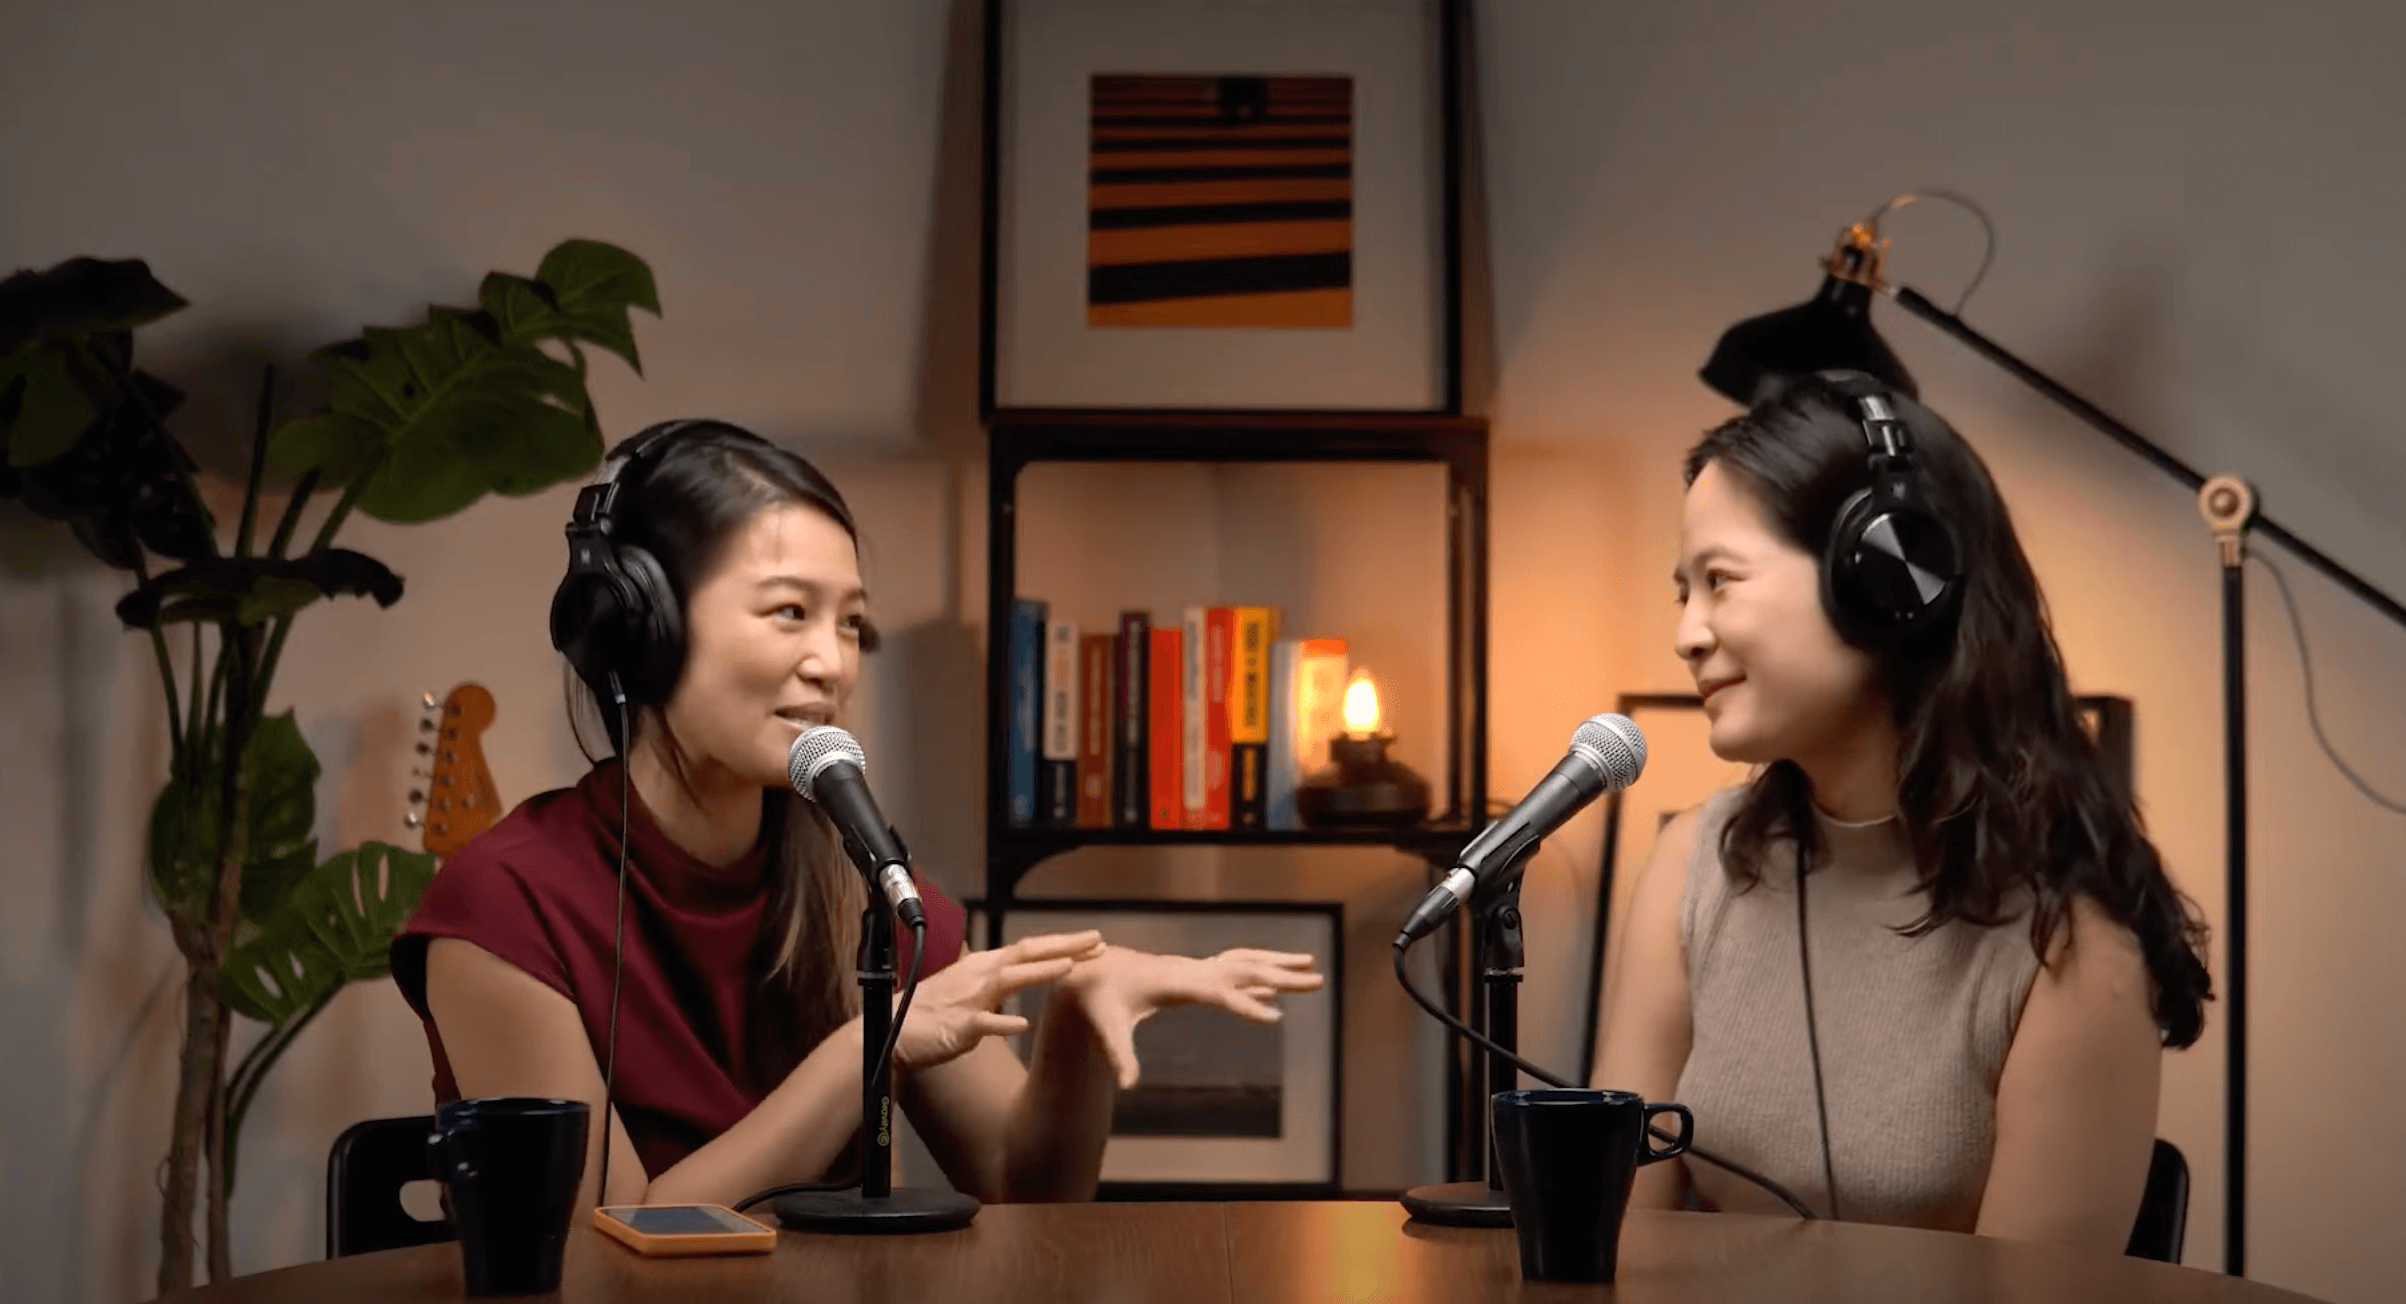 Wong Ling Yah - So This is My Why Podcast Episode 100 featuring Red Hong Yi as guest interviewer